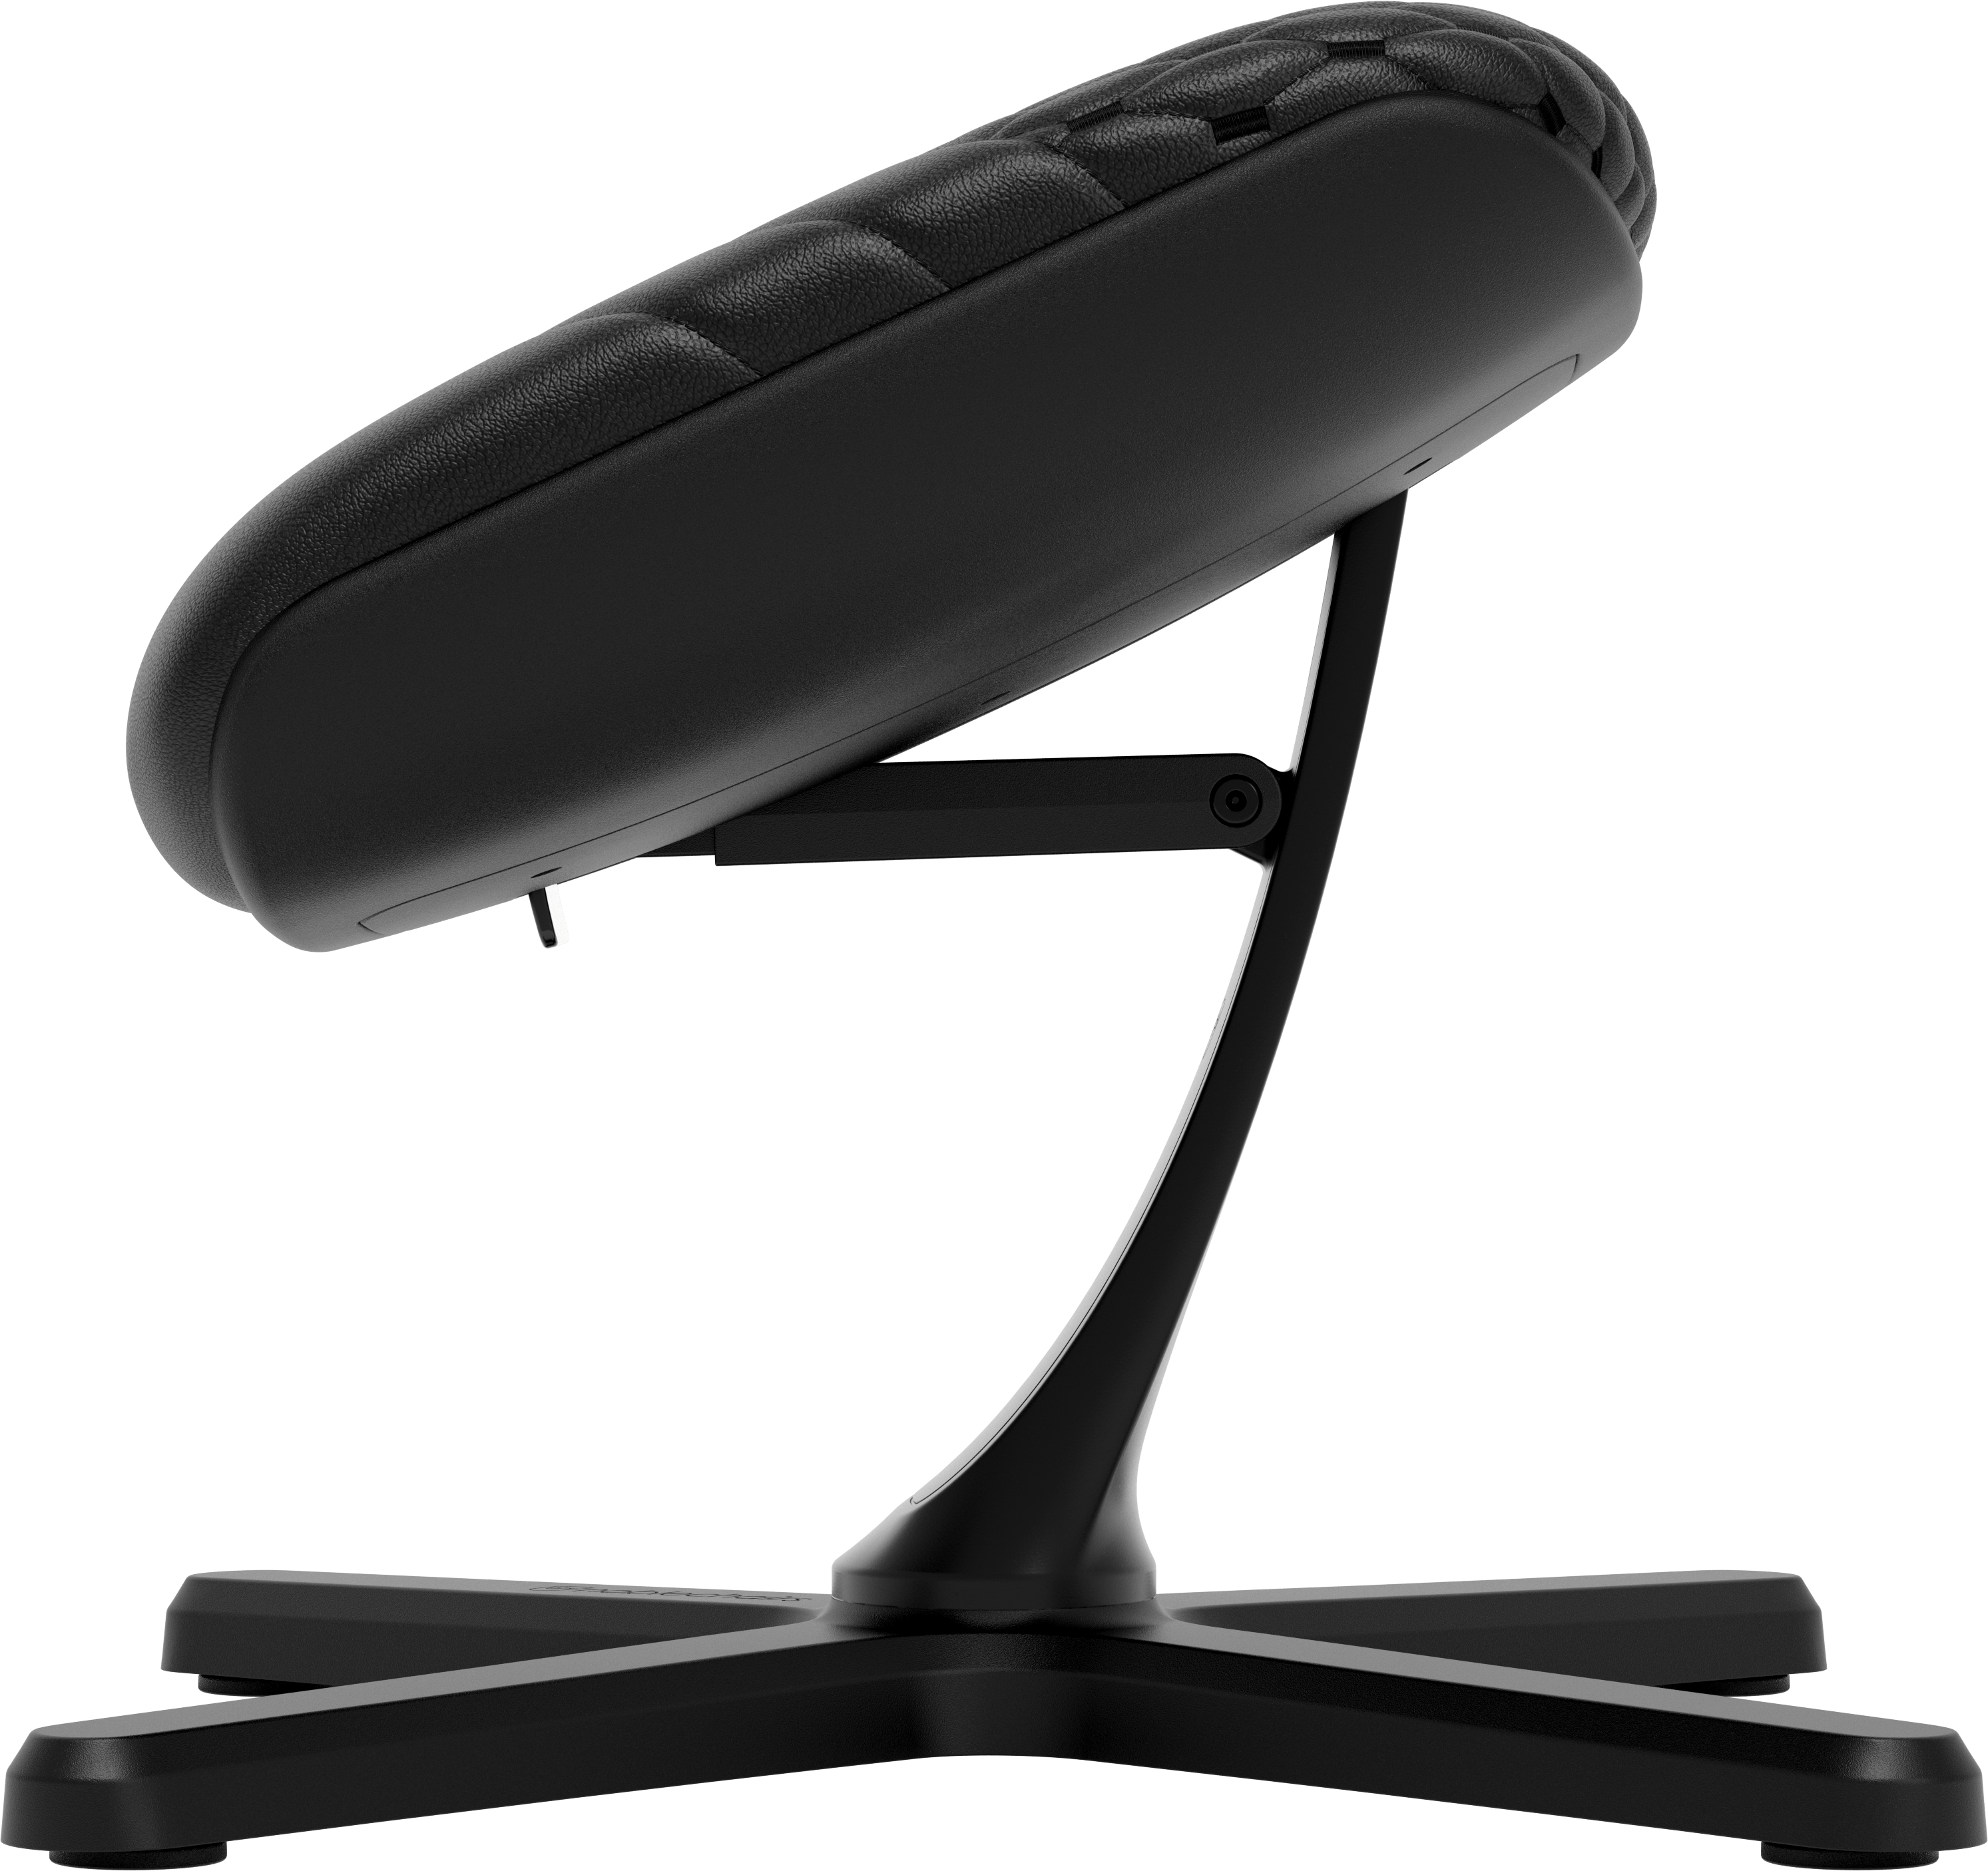 noblechairs Footrest 2 - Real Leather Black adjustable features